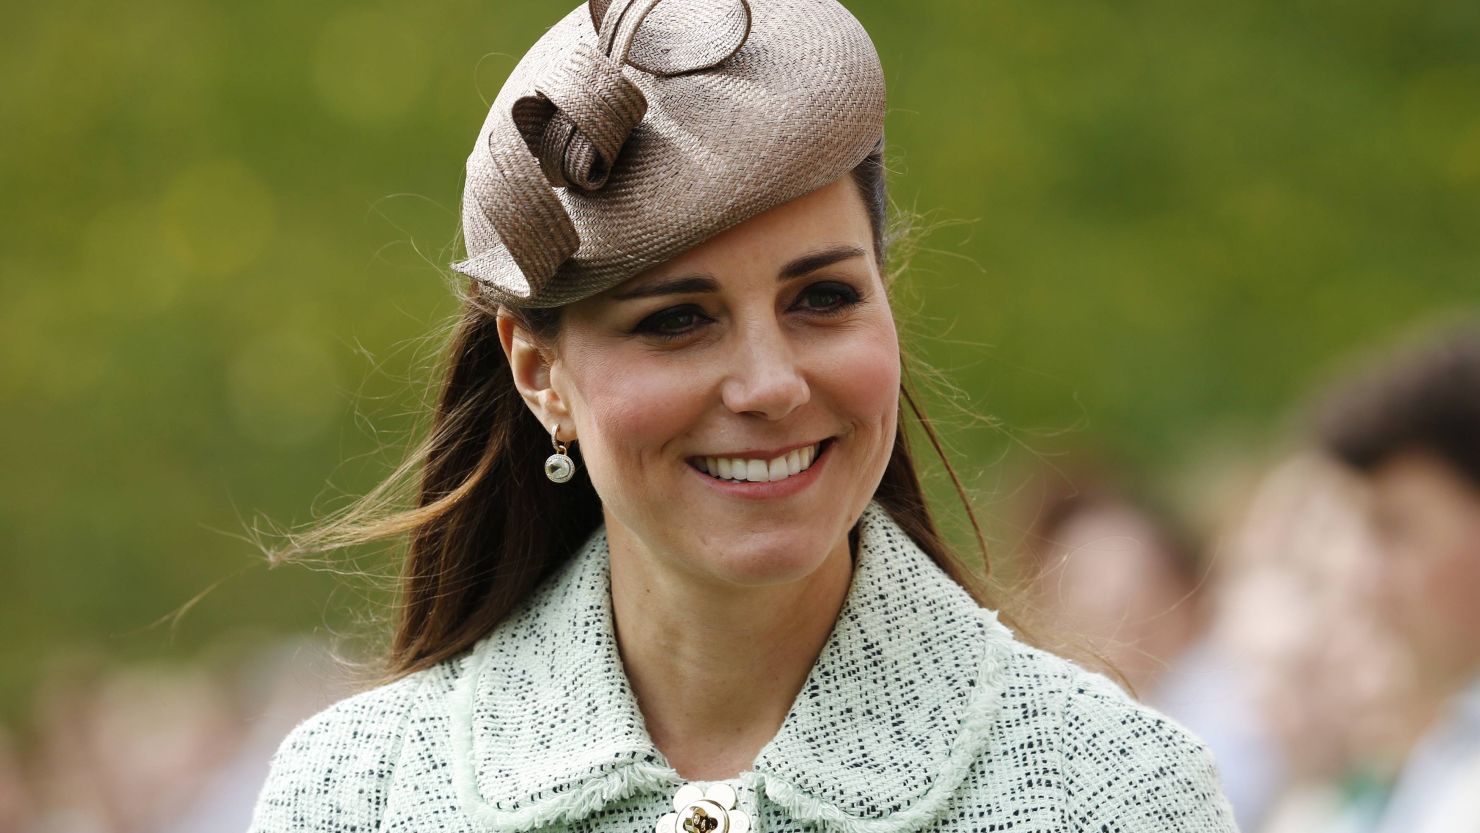 Catherine, Duchess of Cambridge attends the National Review of Queen's Scouts at Windsor Castle on April 21, 2013.